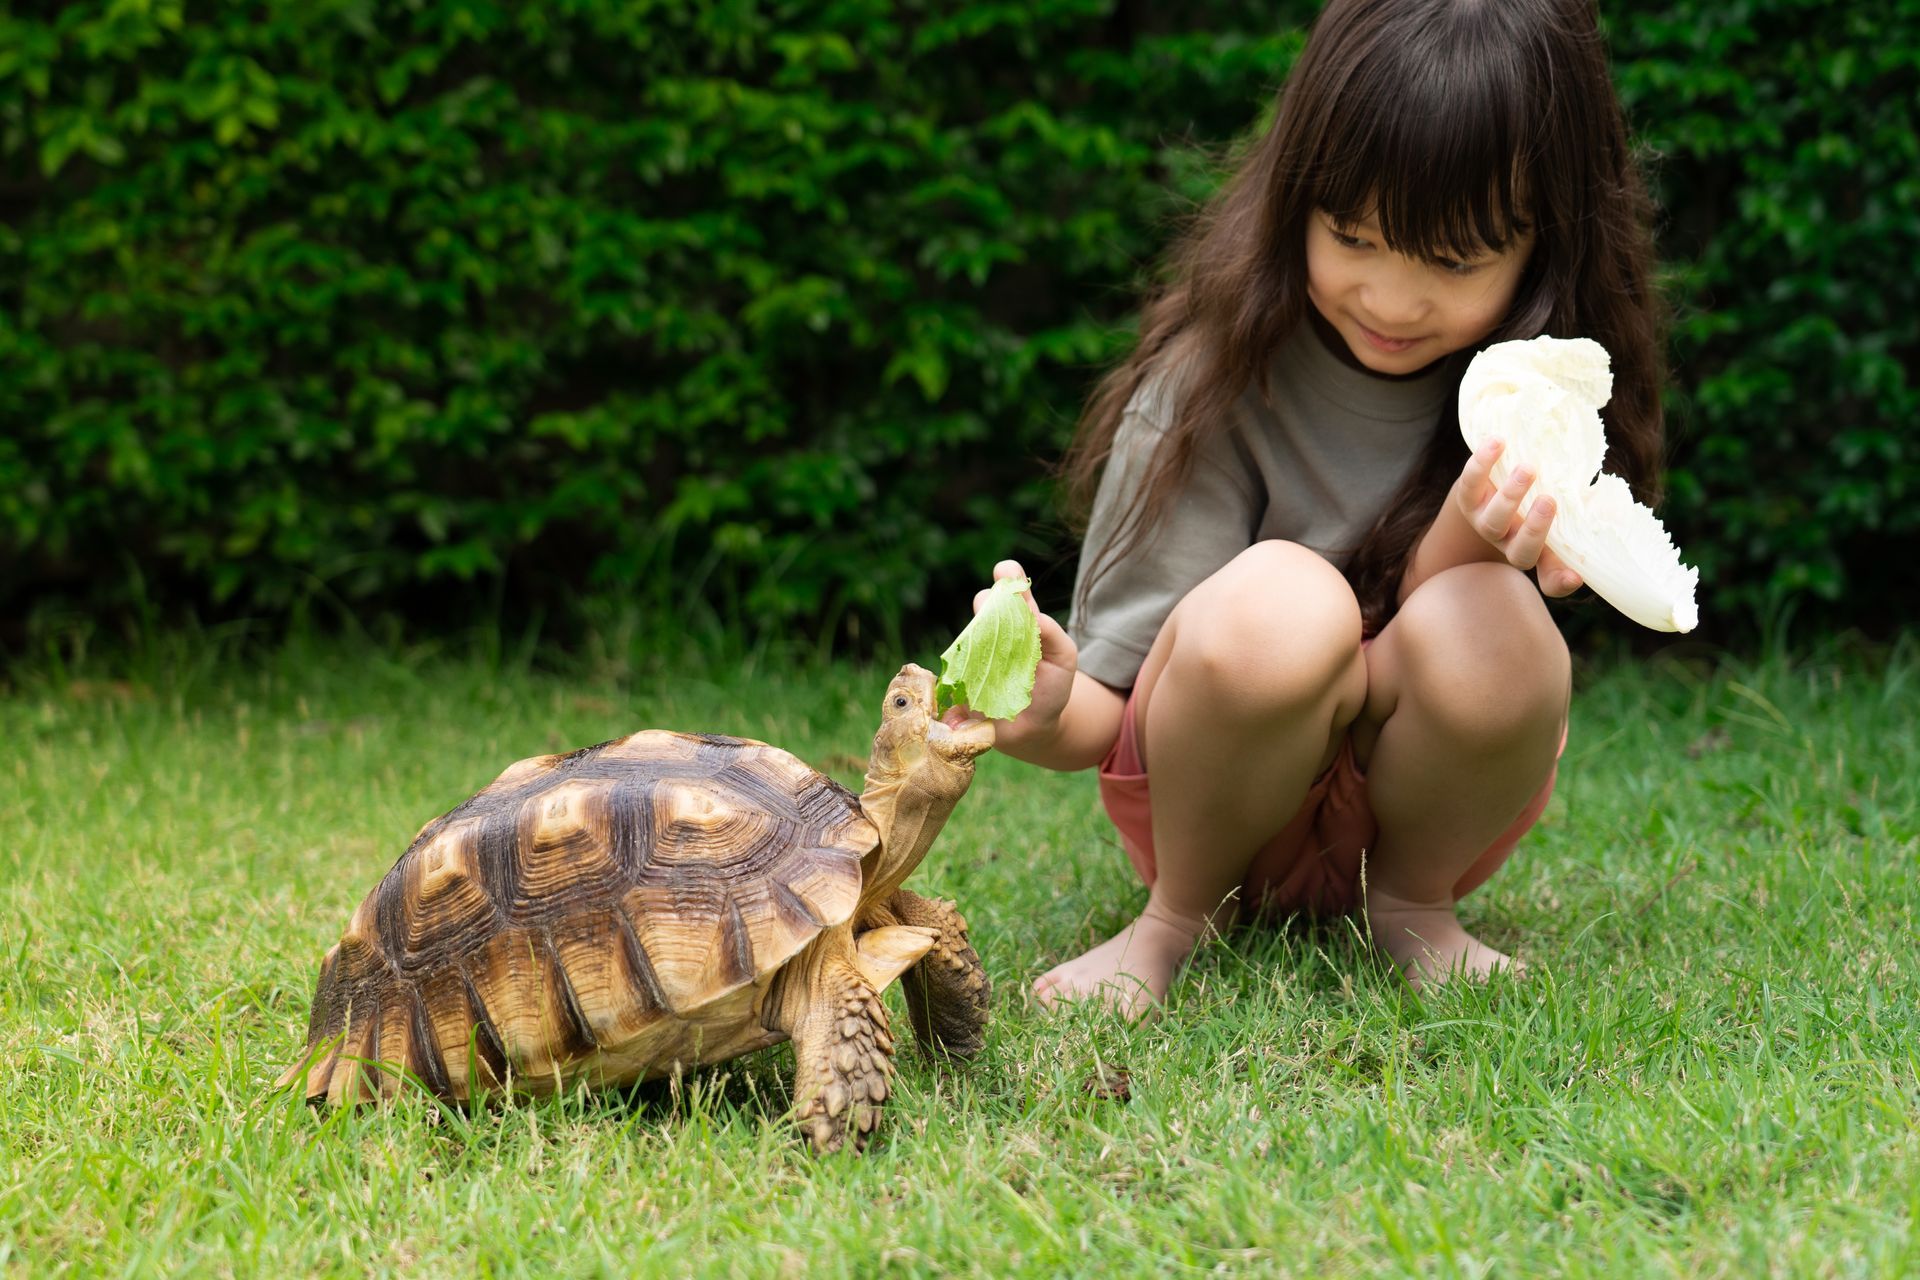 A little girl is feeding a turtle a piece of apple.